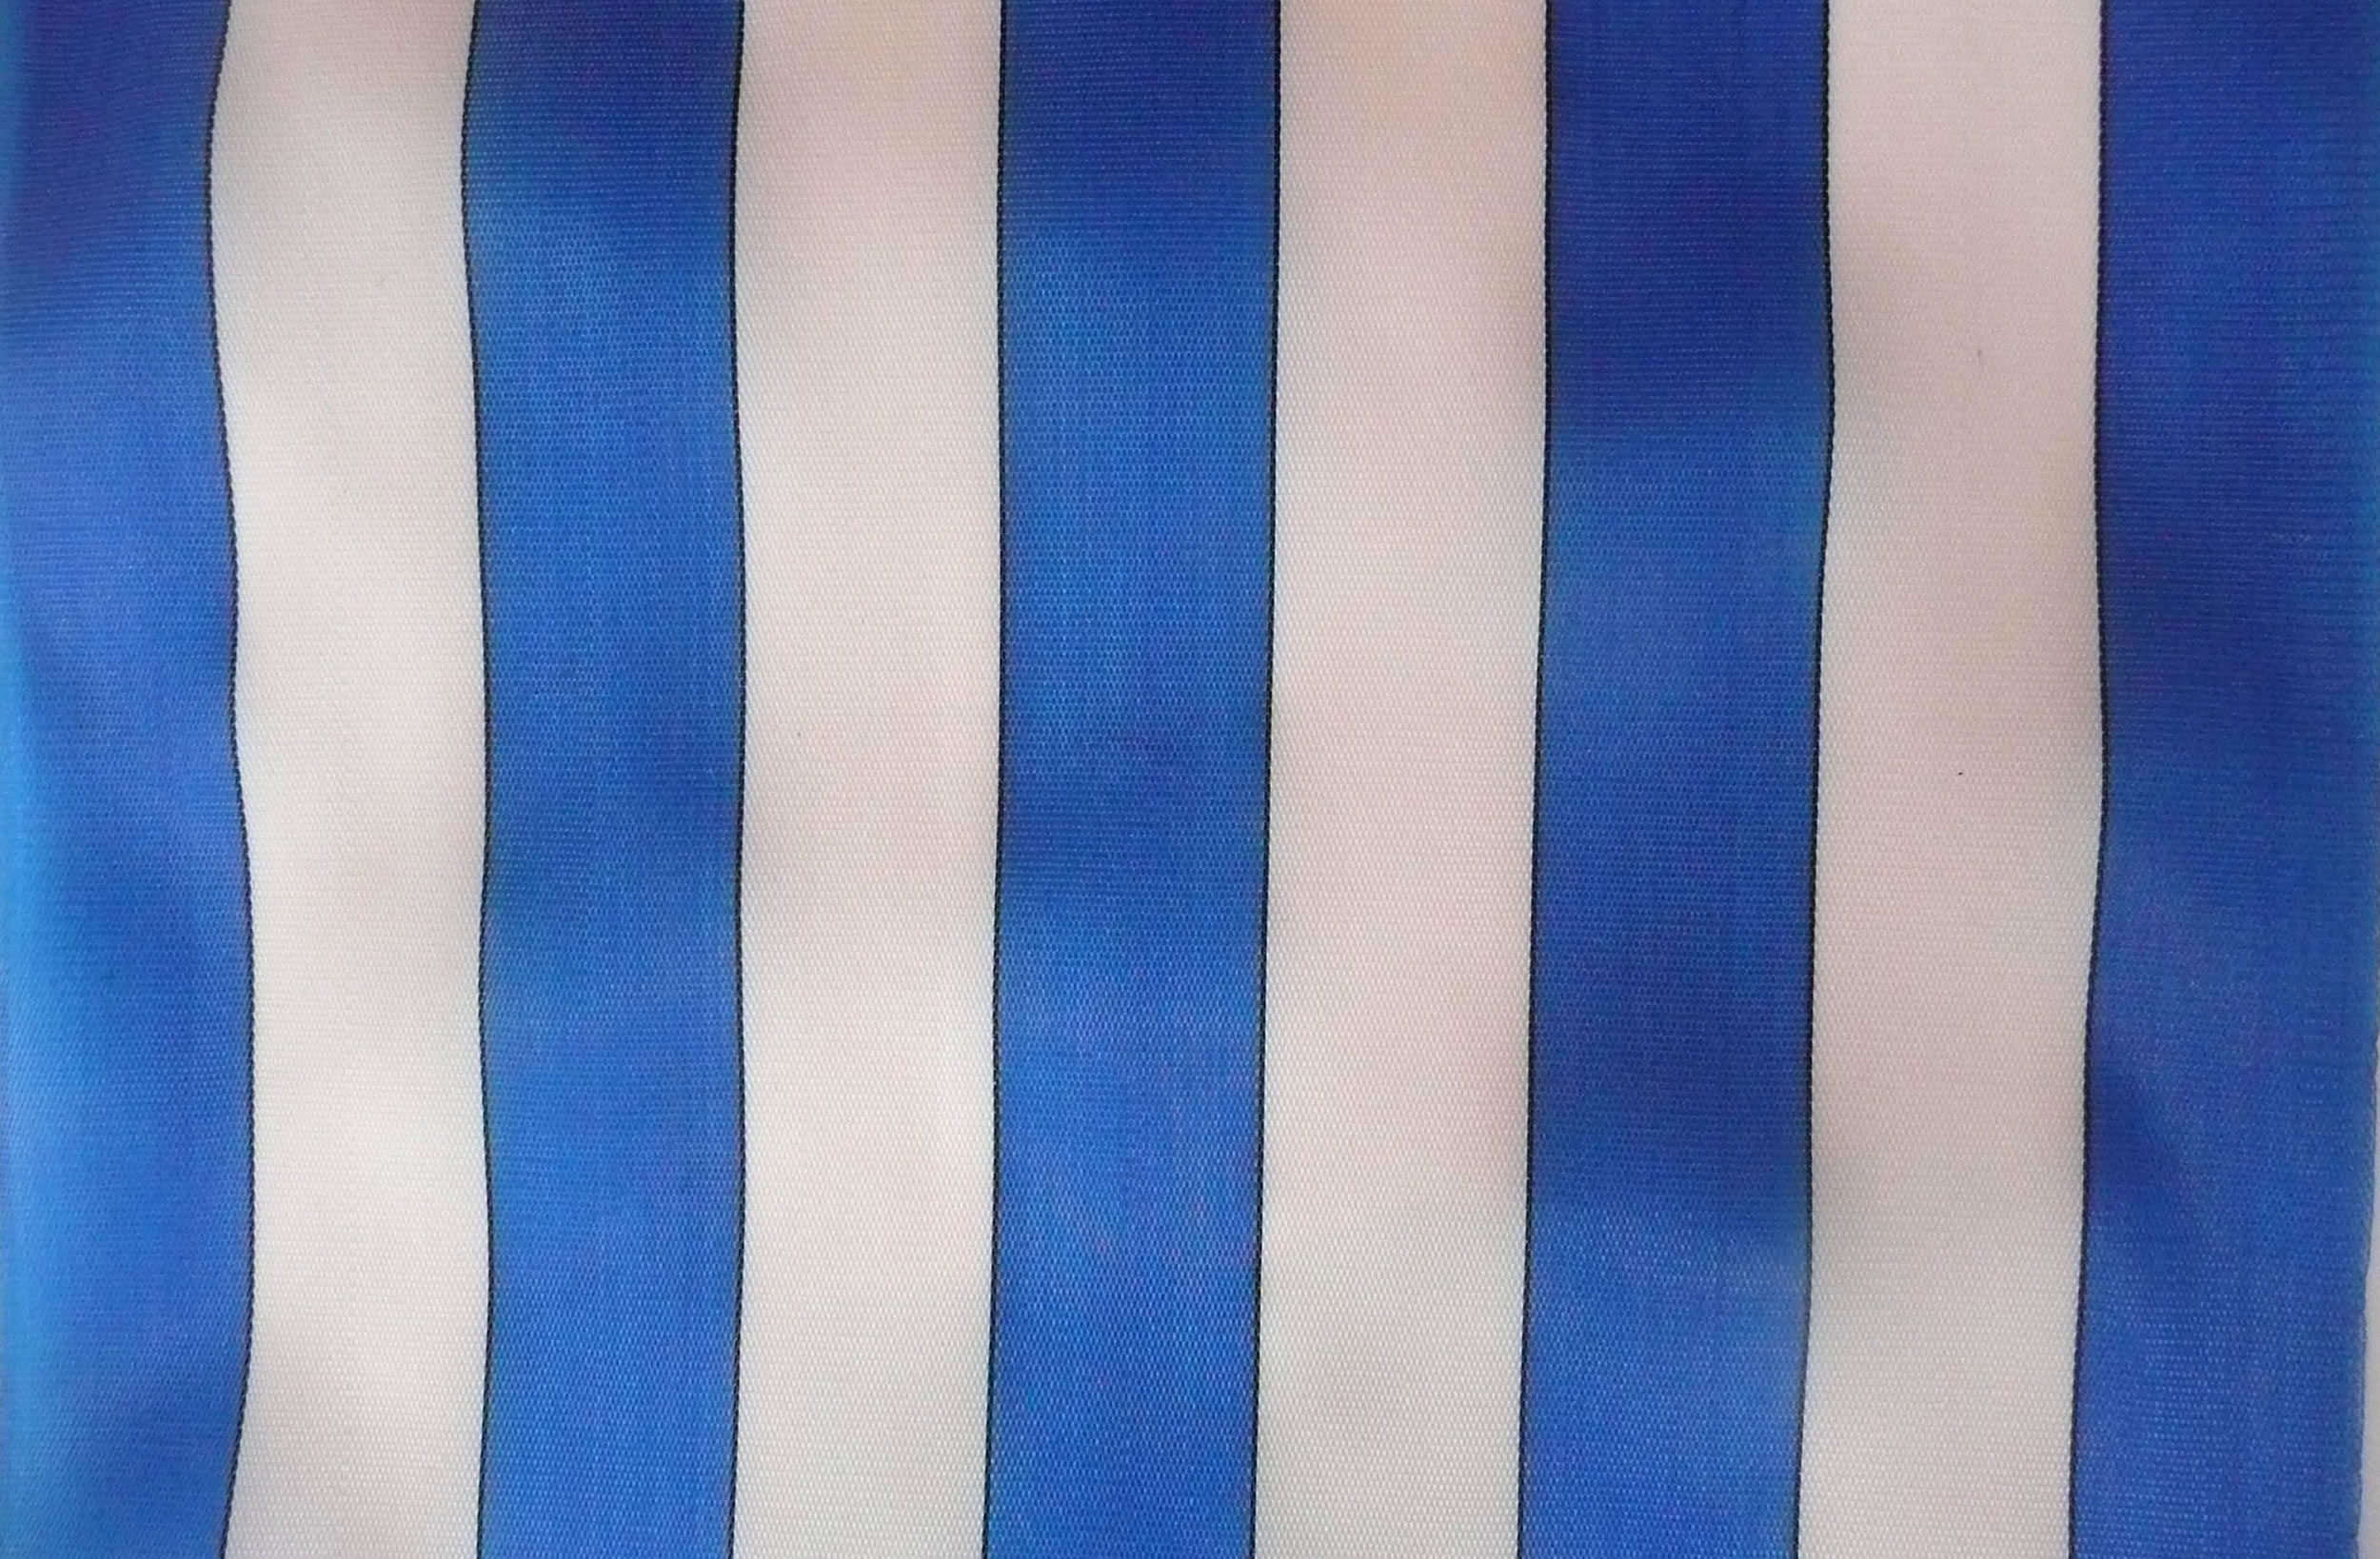 Blue and White Waterproof Deckchair Fabric